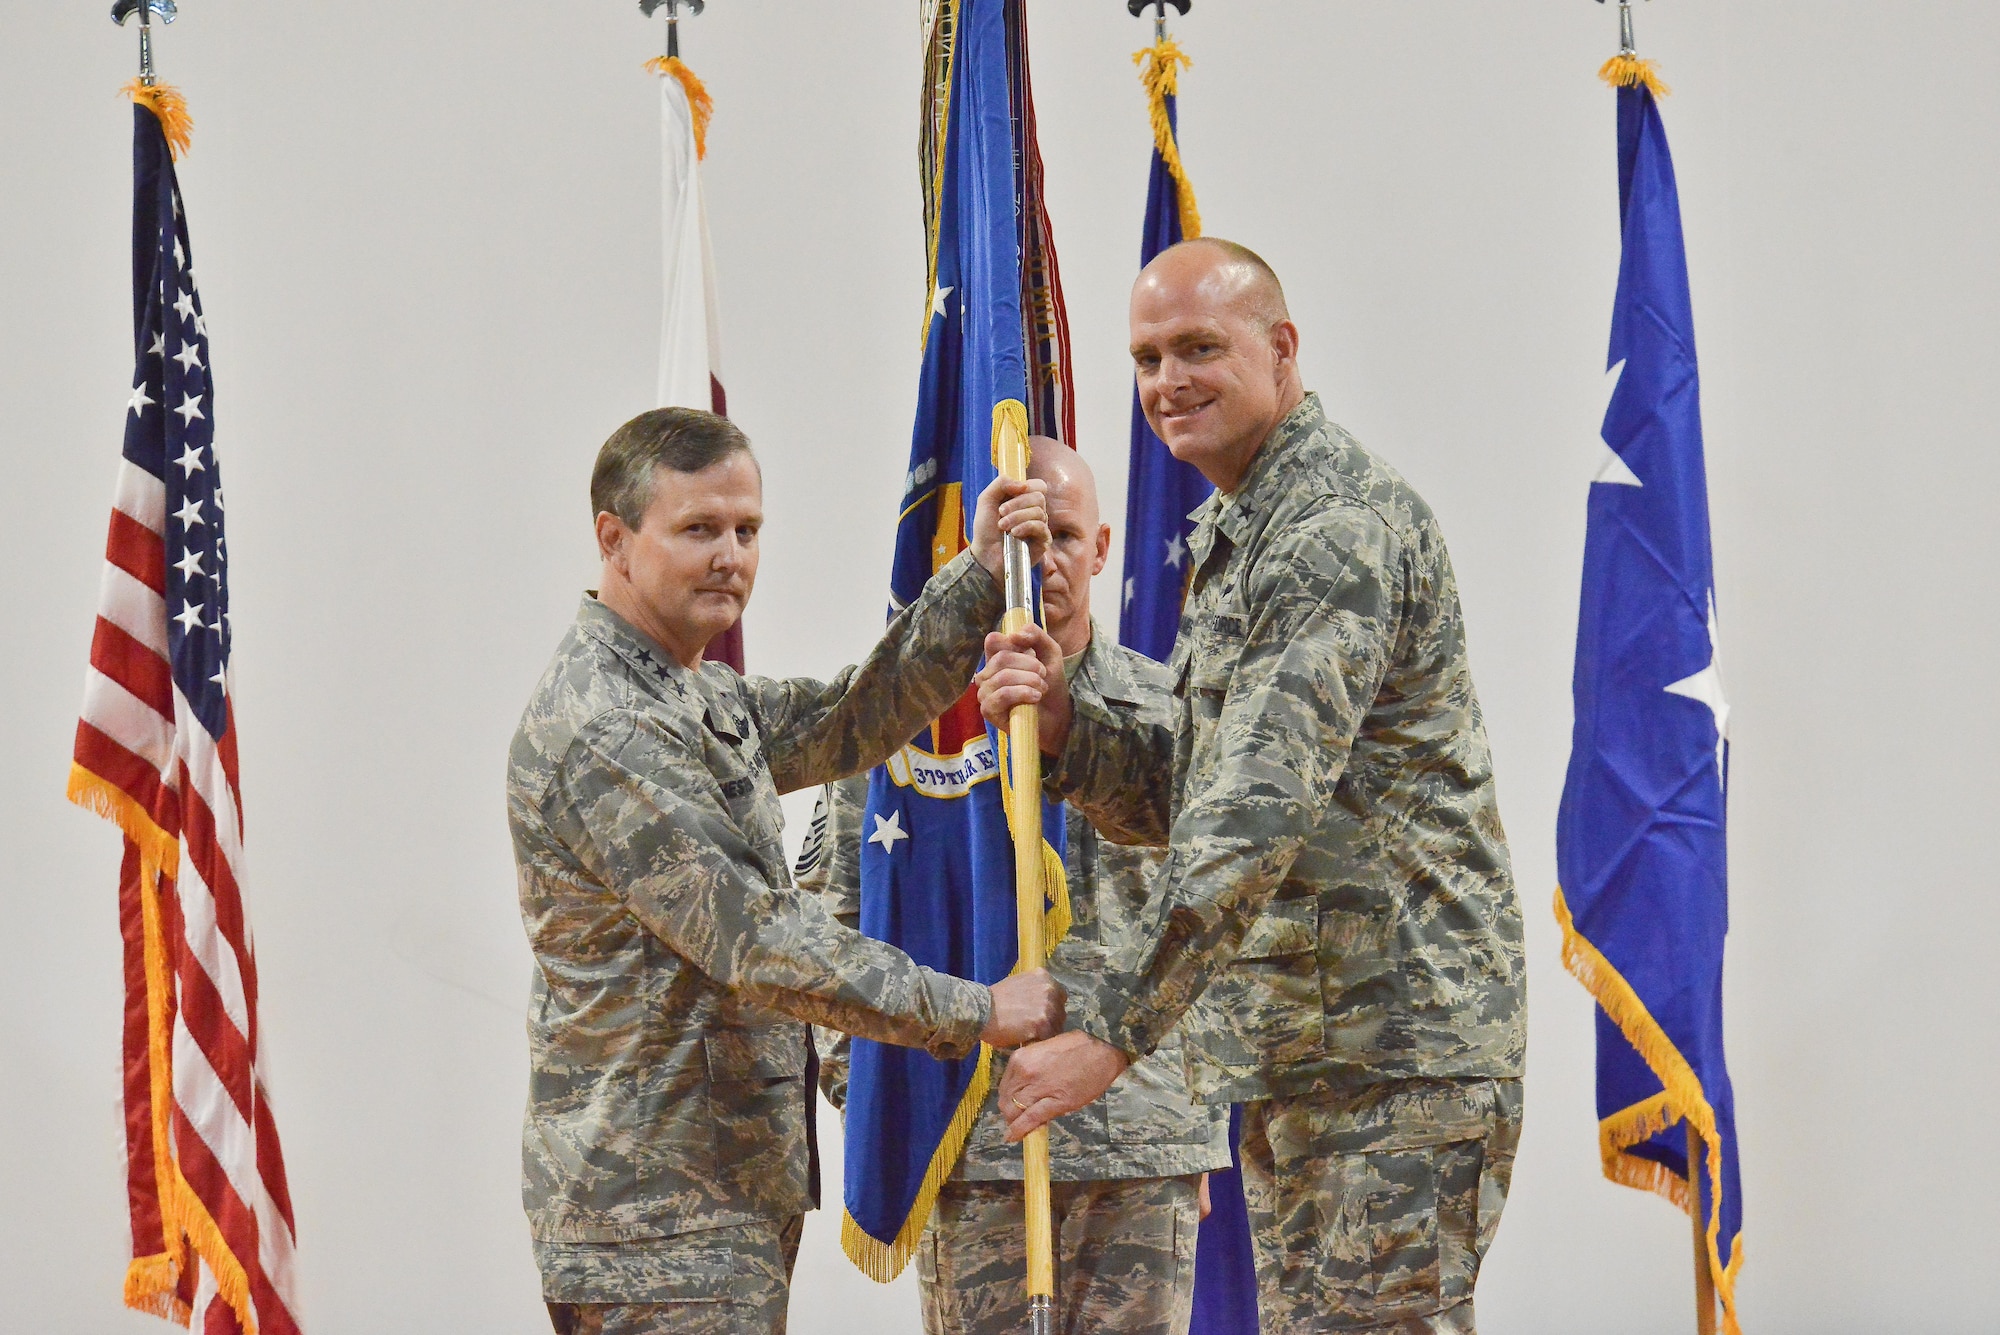 Lt. Gen. John Hesterman, U.S. Air Forces Central Command commander, passes the guidon to Brig. Gen Darren James as he assumes command of the 379th Air Expeditionary Wing June 14, 25015 Al Udeid Air Base, Qatar. Change of commands is a tradition that dates back to the Roman Legion in which authority is transferred from one commanding officer to another and is completed in front of the soldiers.  (U.S. Air Force photo/Staff Sgt. Alexandre Montes)